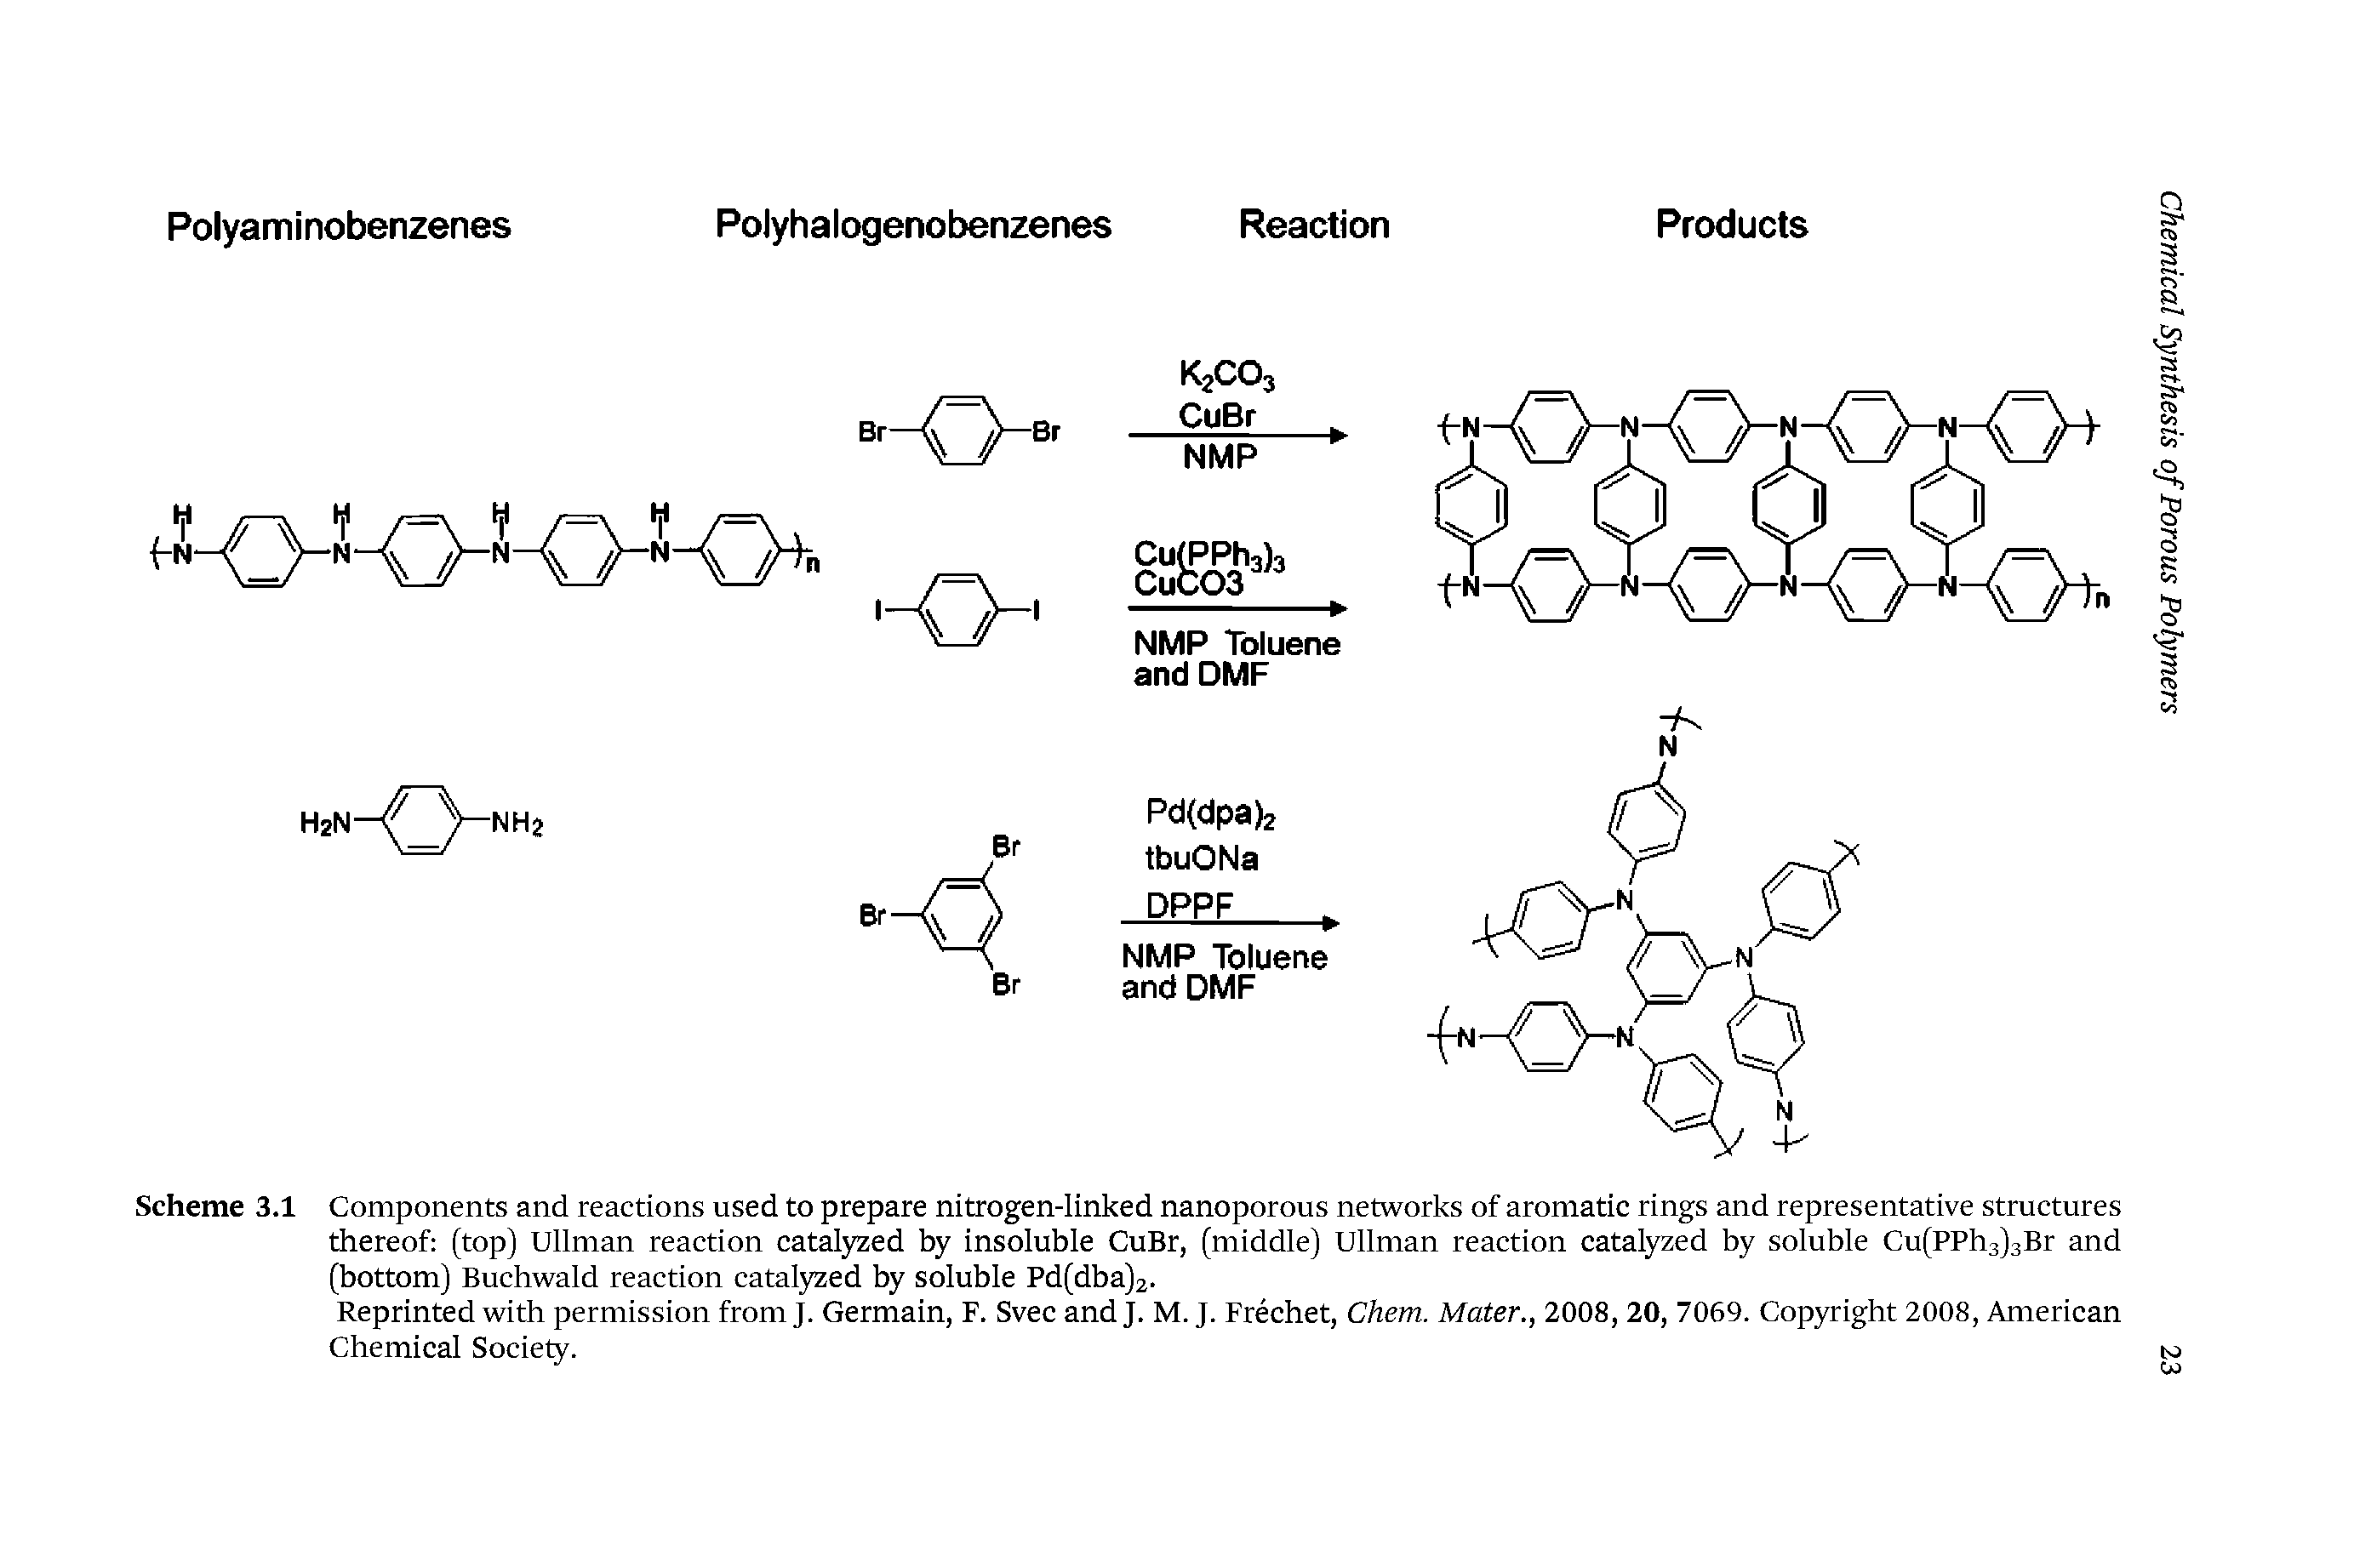 Scheme 3.1 Components and reactions used to prepare nitrogen-linked nanoporous networks of aromatic rings and representative structures thereof (top) Ullman reaction catiyzed by insoluble CuBr, (middle) Ullman reaction catalyzed by soluble Cu(PPh3)3Br and (bottom) Buchwald reaction catalyzed by soluble Pd(dba)2-...